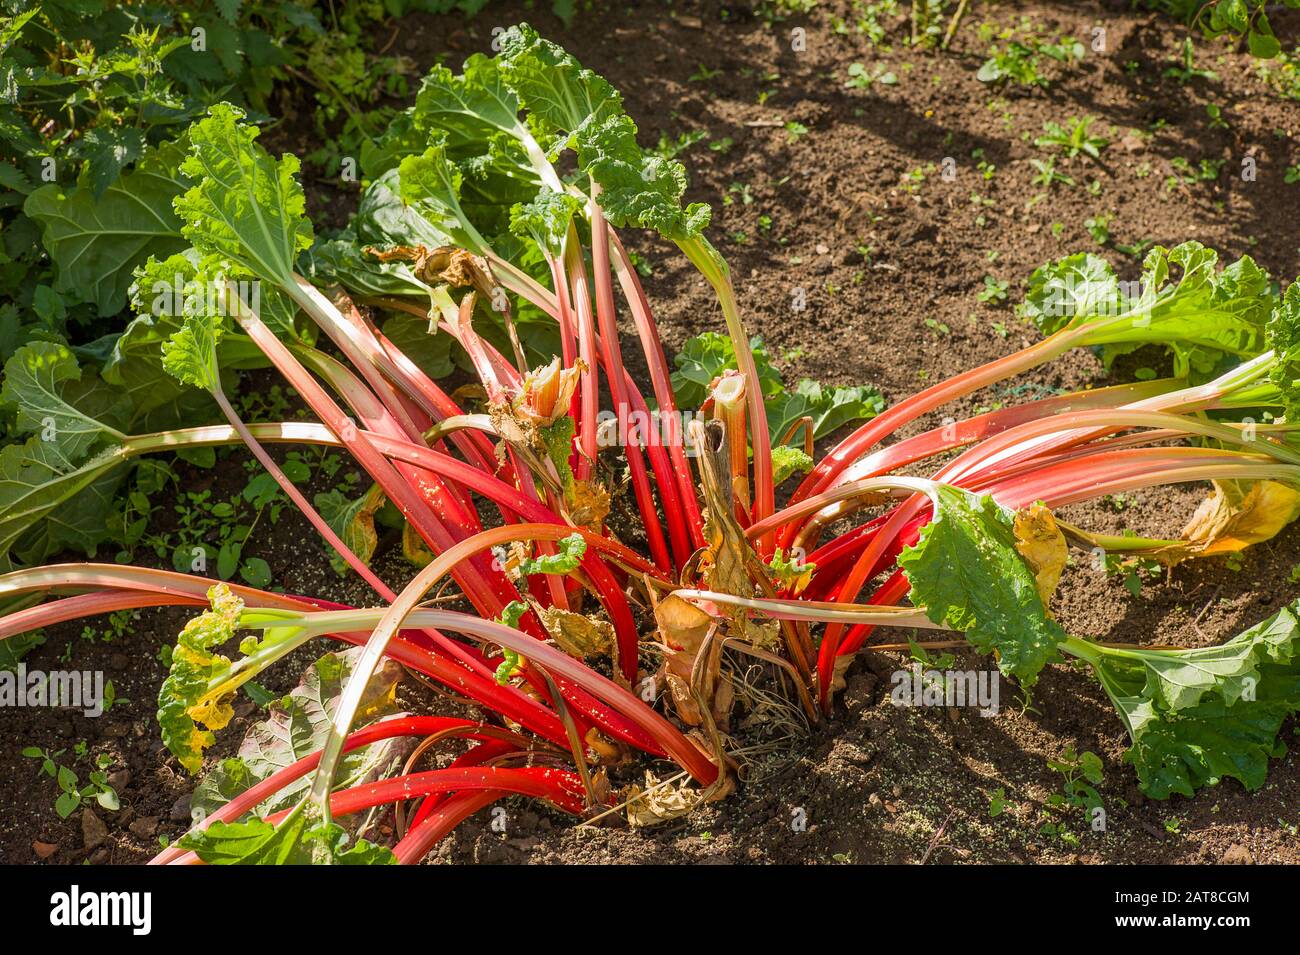 The forcing cover has just been removed from this Rhubarb plant revealling already ripe stems fit for picking to cook and eat Stock Photo